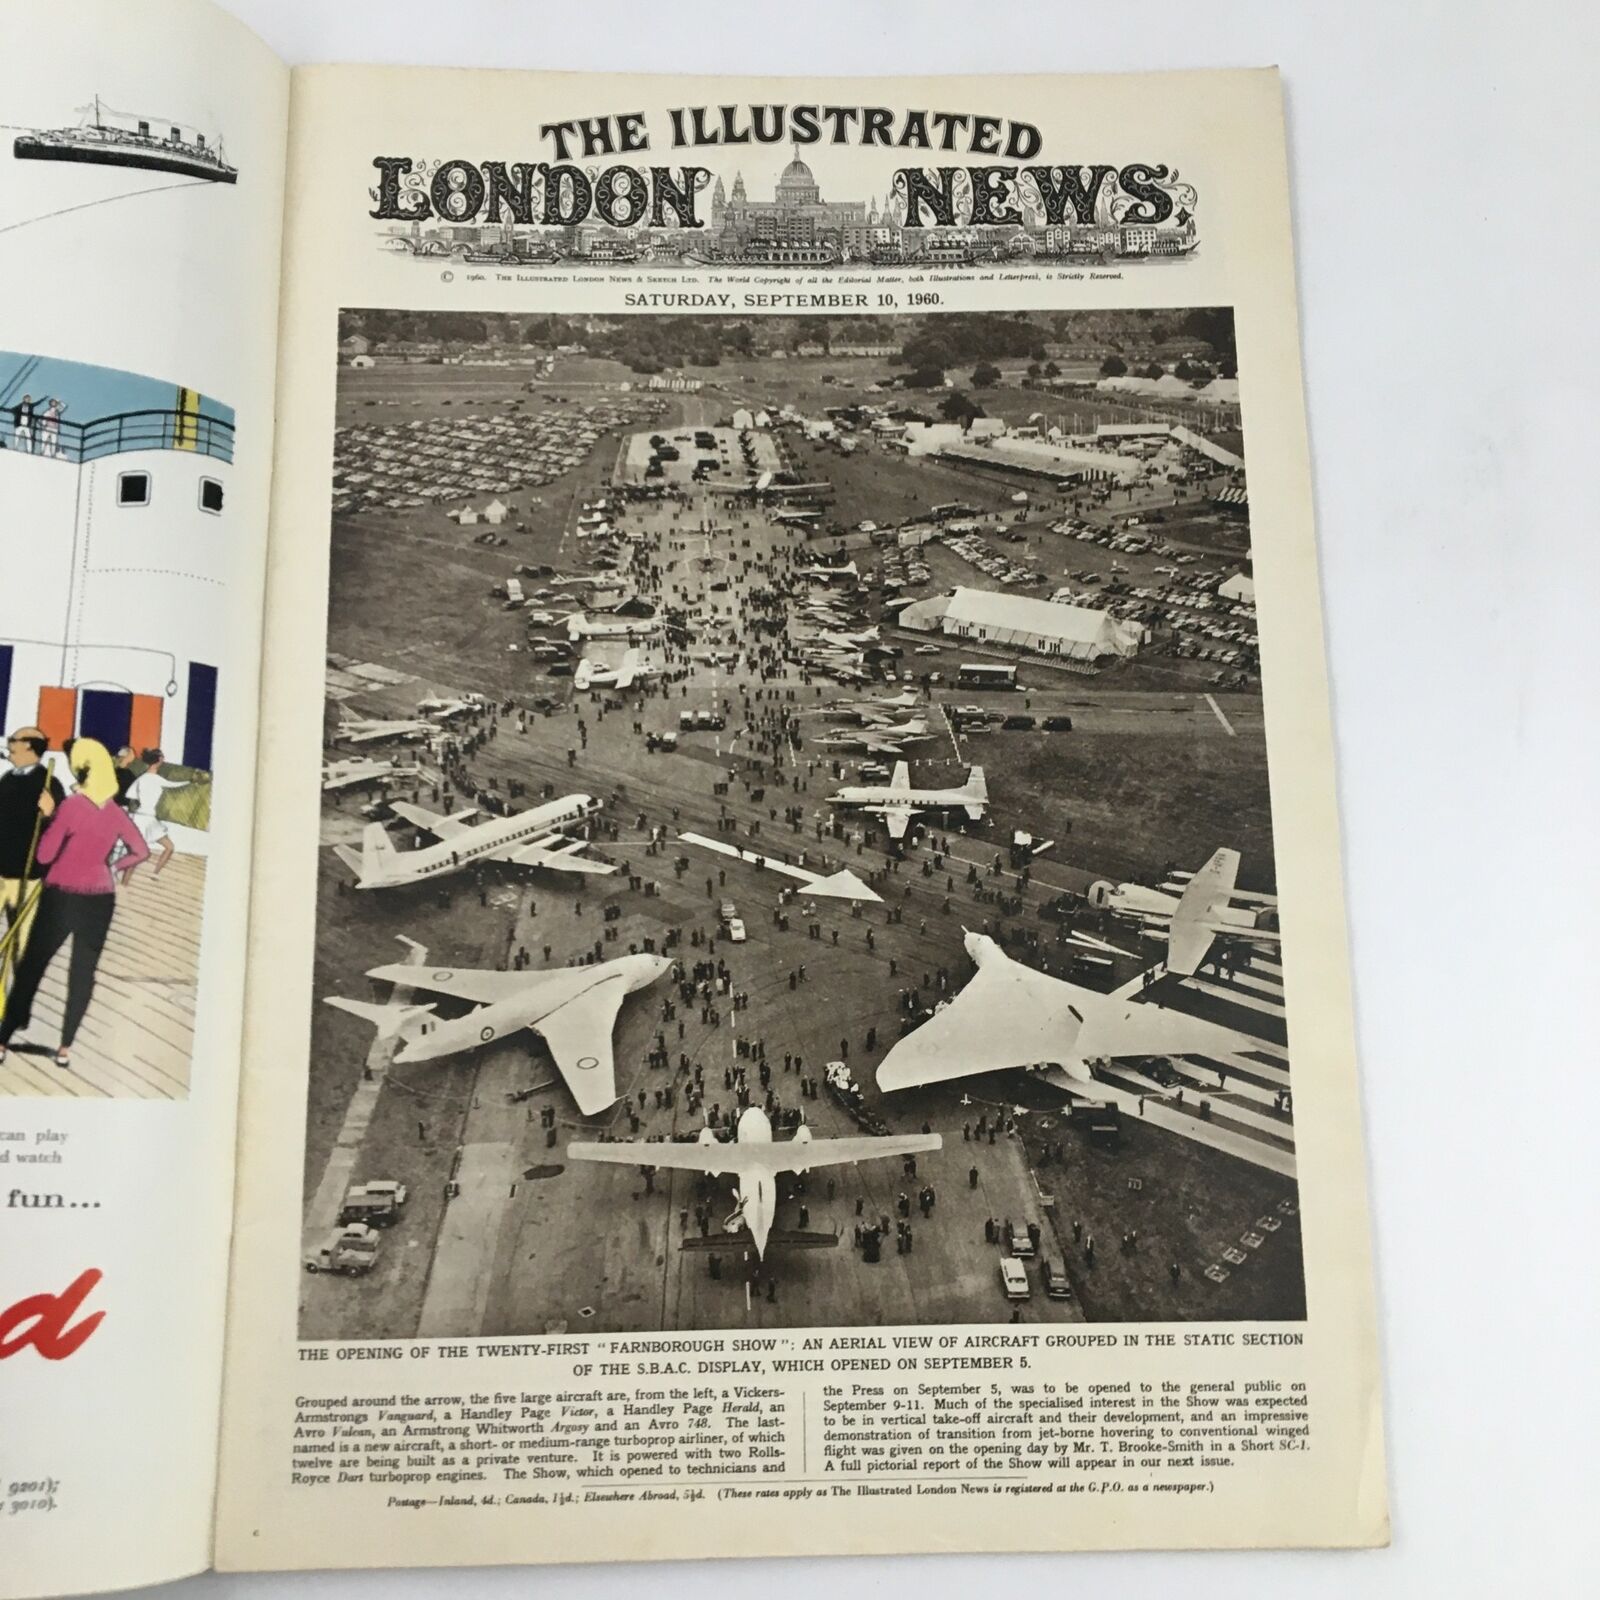 The Illustrated London News September 10 1960 The Opening of Farnborough Show